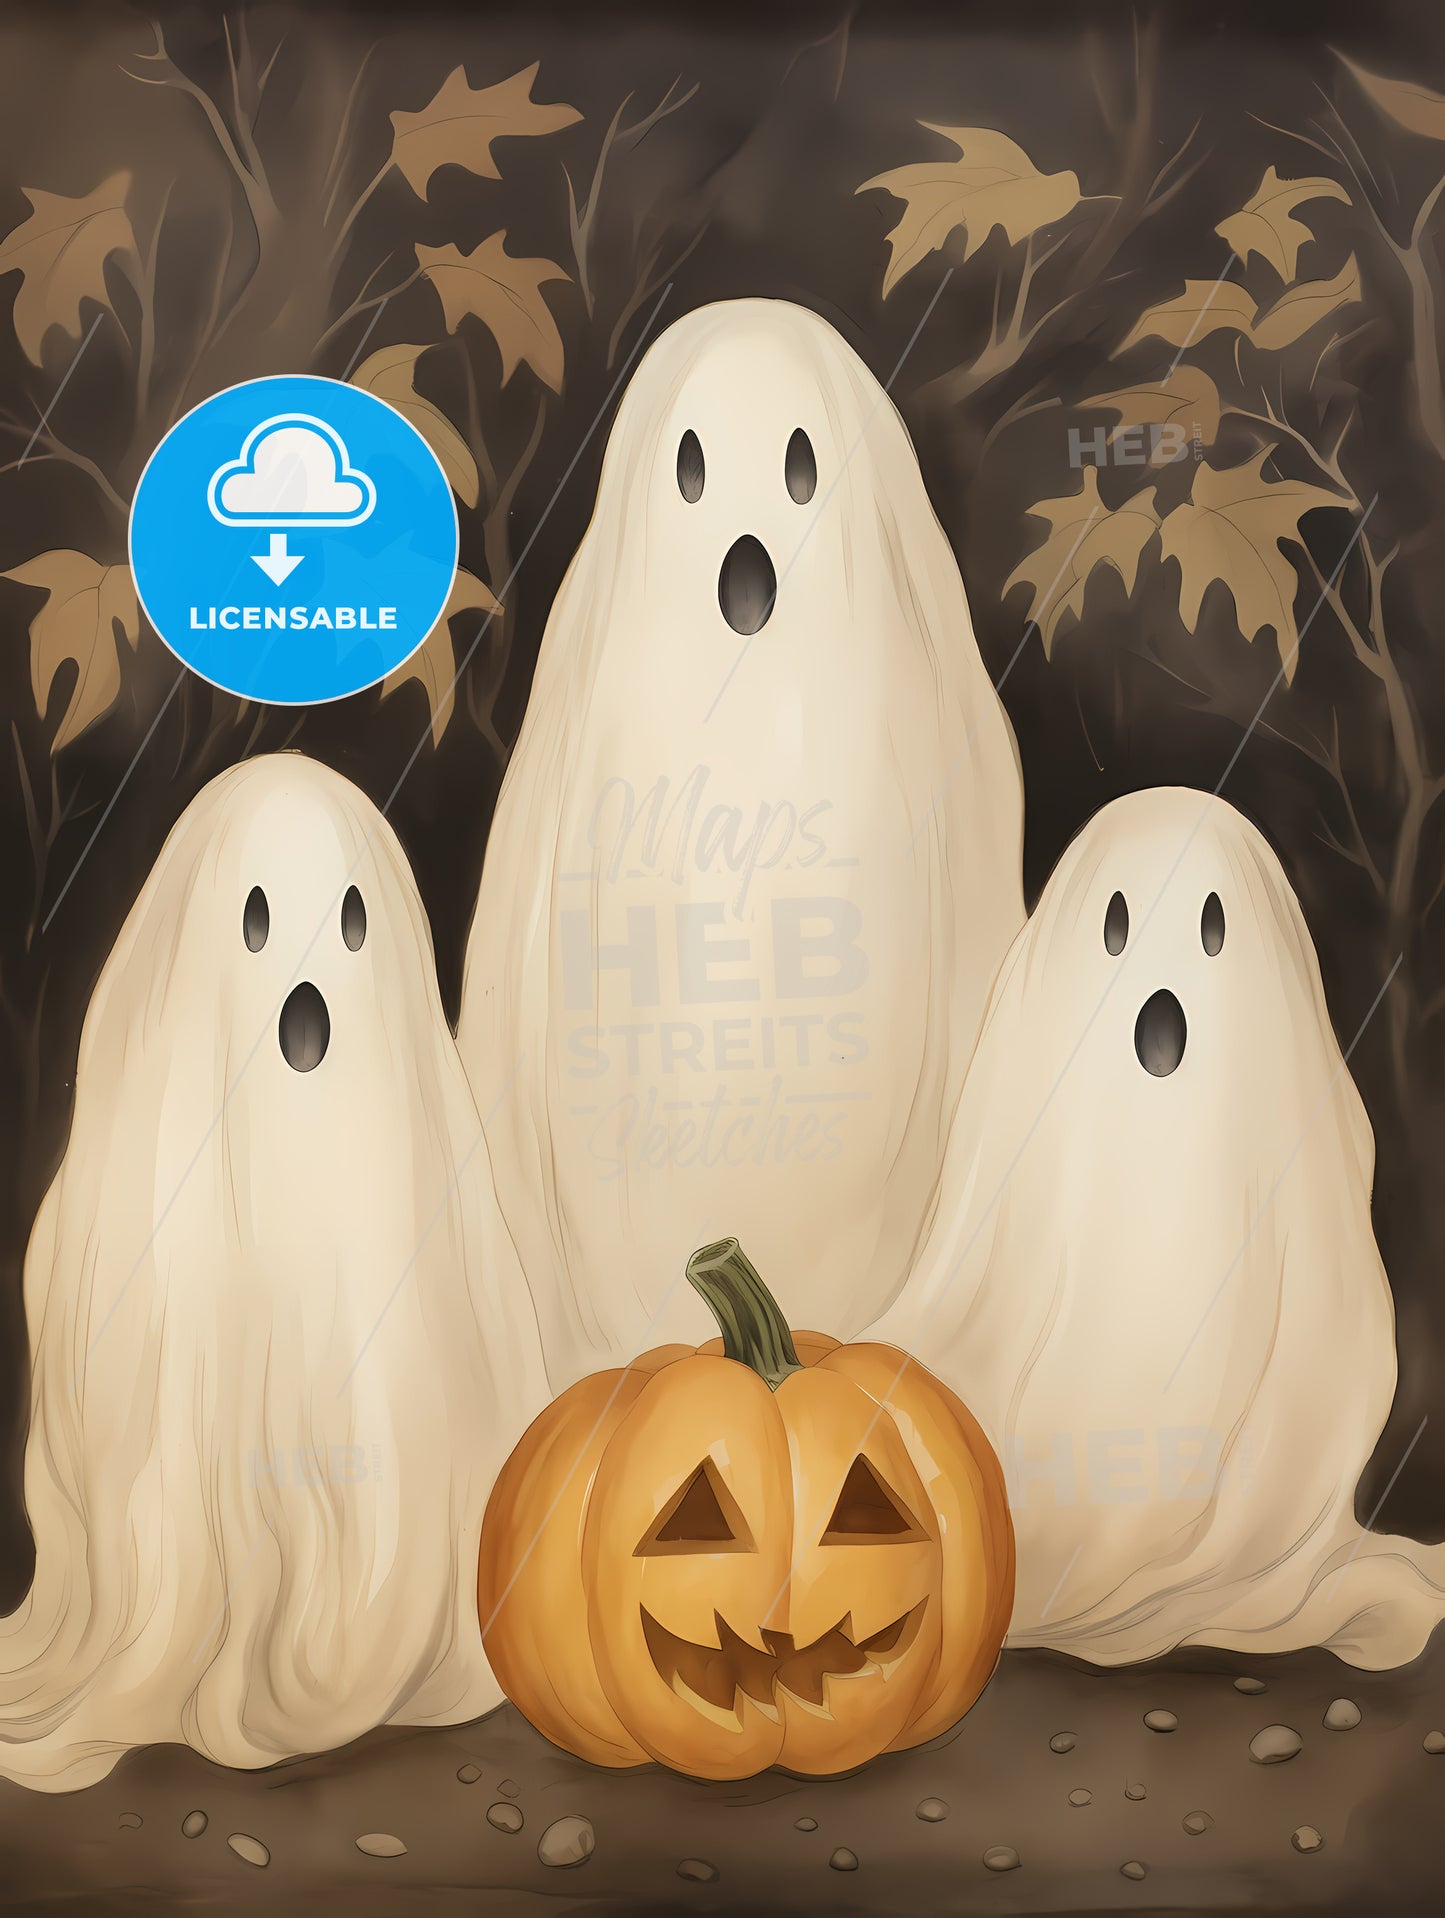 Group Of Ghosts With A Pumpkin